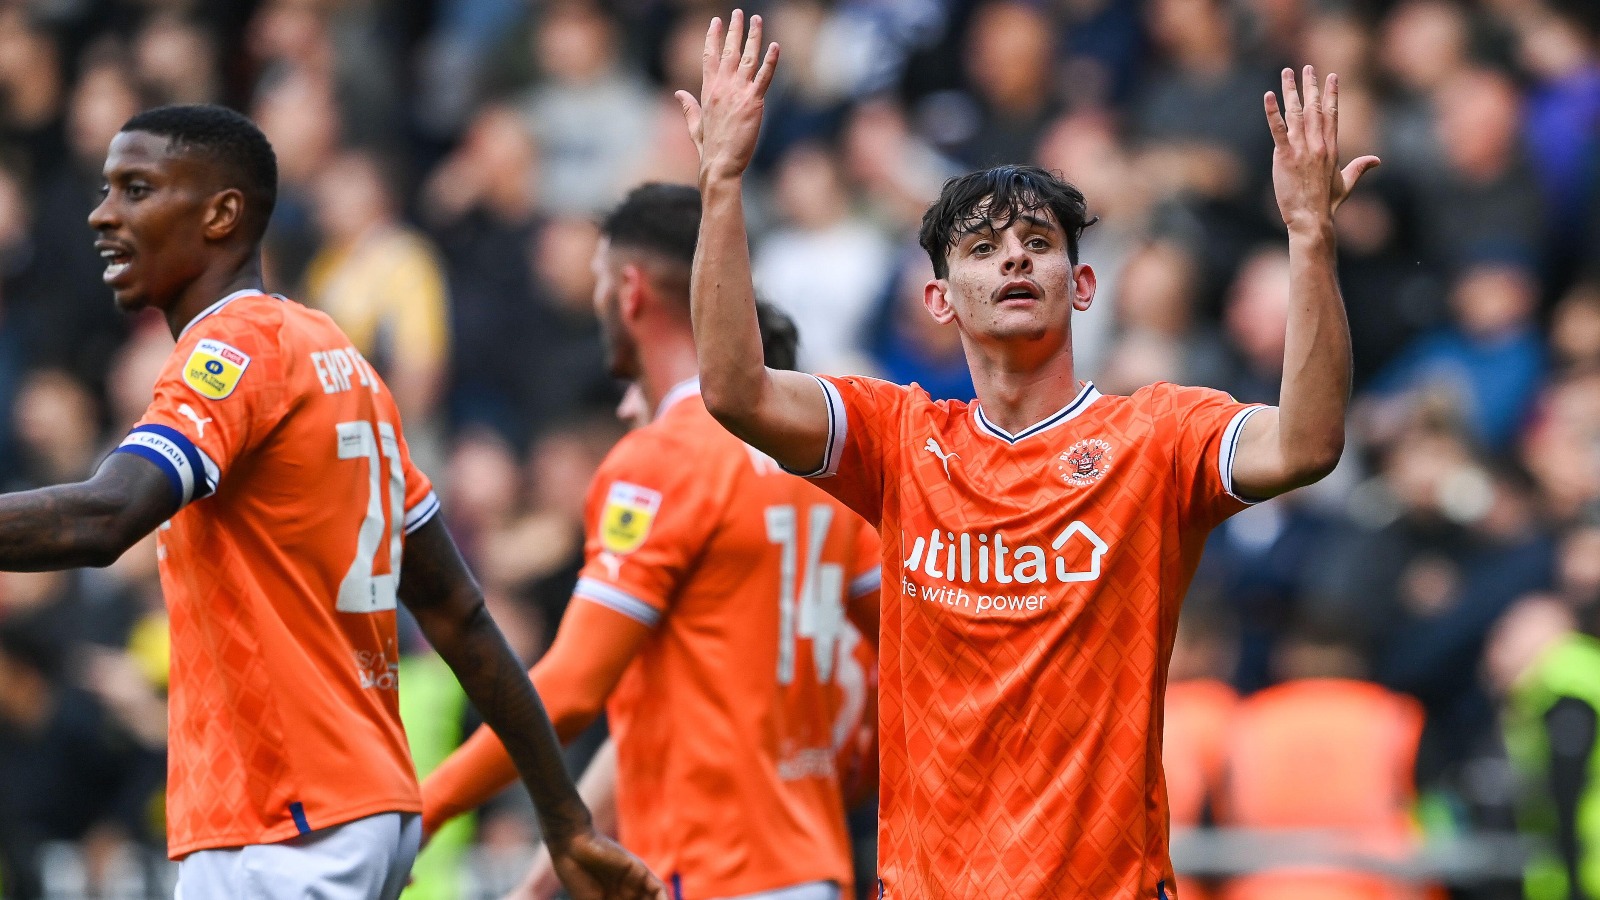 Arsenal loanee Charlie Patino #28 of Blackpool celebrates his goal to make it 2-1 during the Sky Bet Championship match Blackpool vs Preston North End at Bloomfield Road, Blackpool, United Kingdom, 22nd October 2022